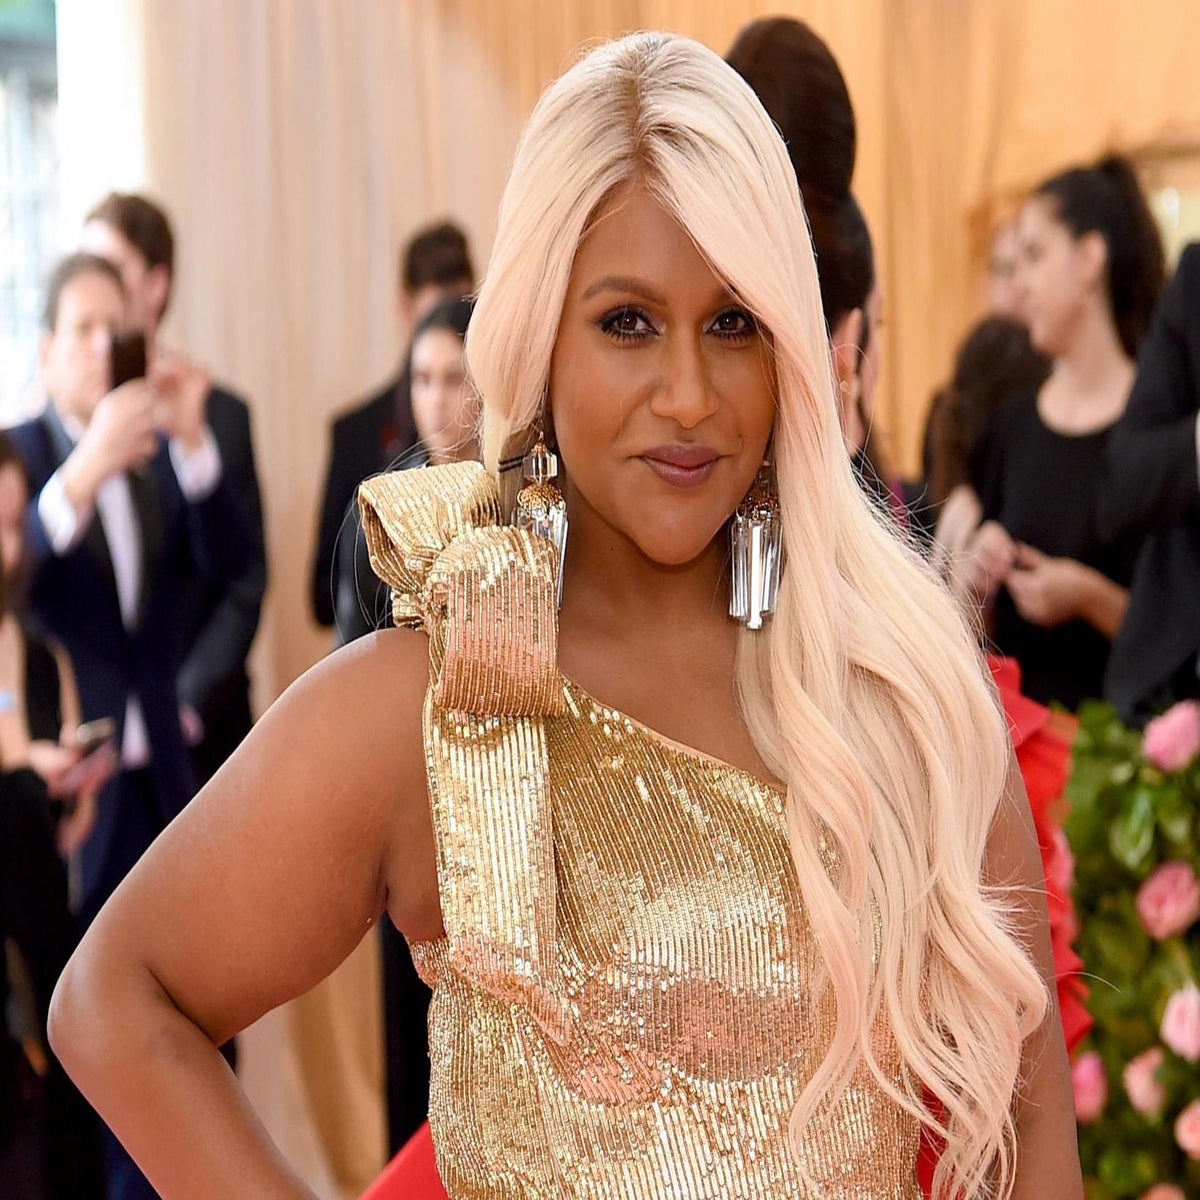 Met Gala 2019: Mindy Kaling goes blonde for 'camp' fashion spectacle